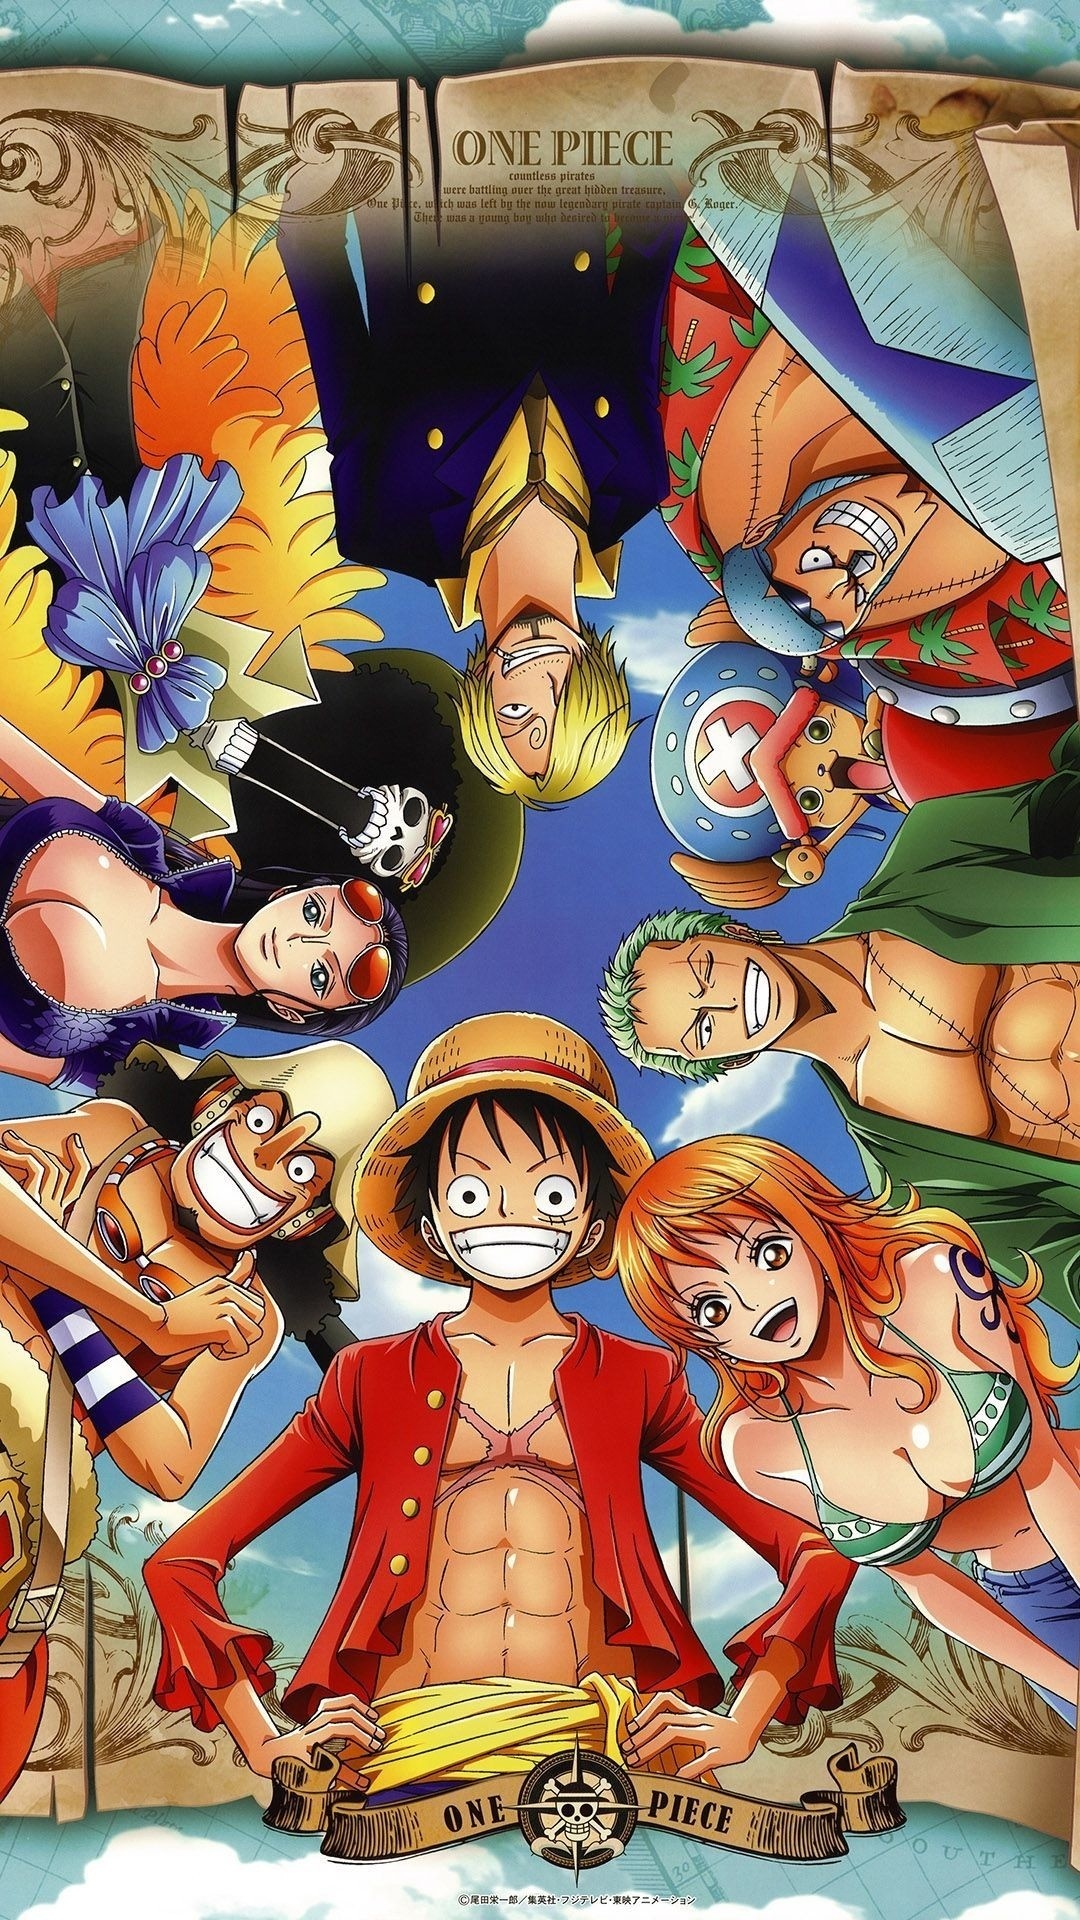 1080x1920 one piece wallpaper android download 1080 X 1920